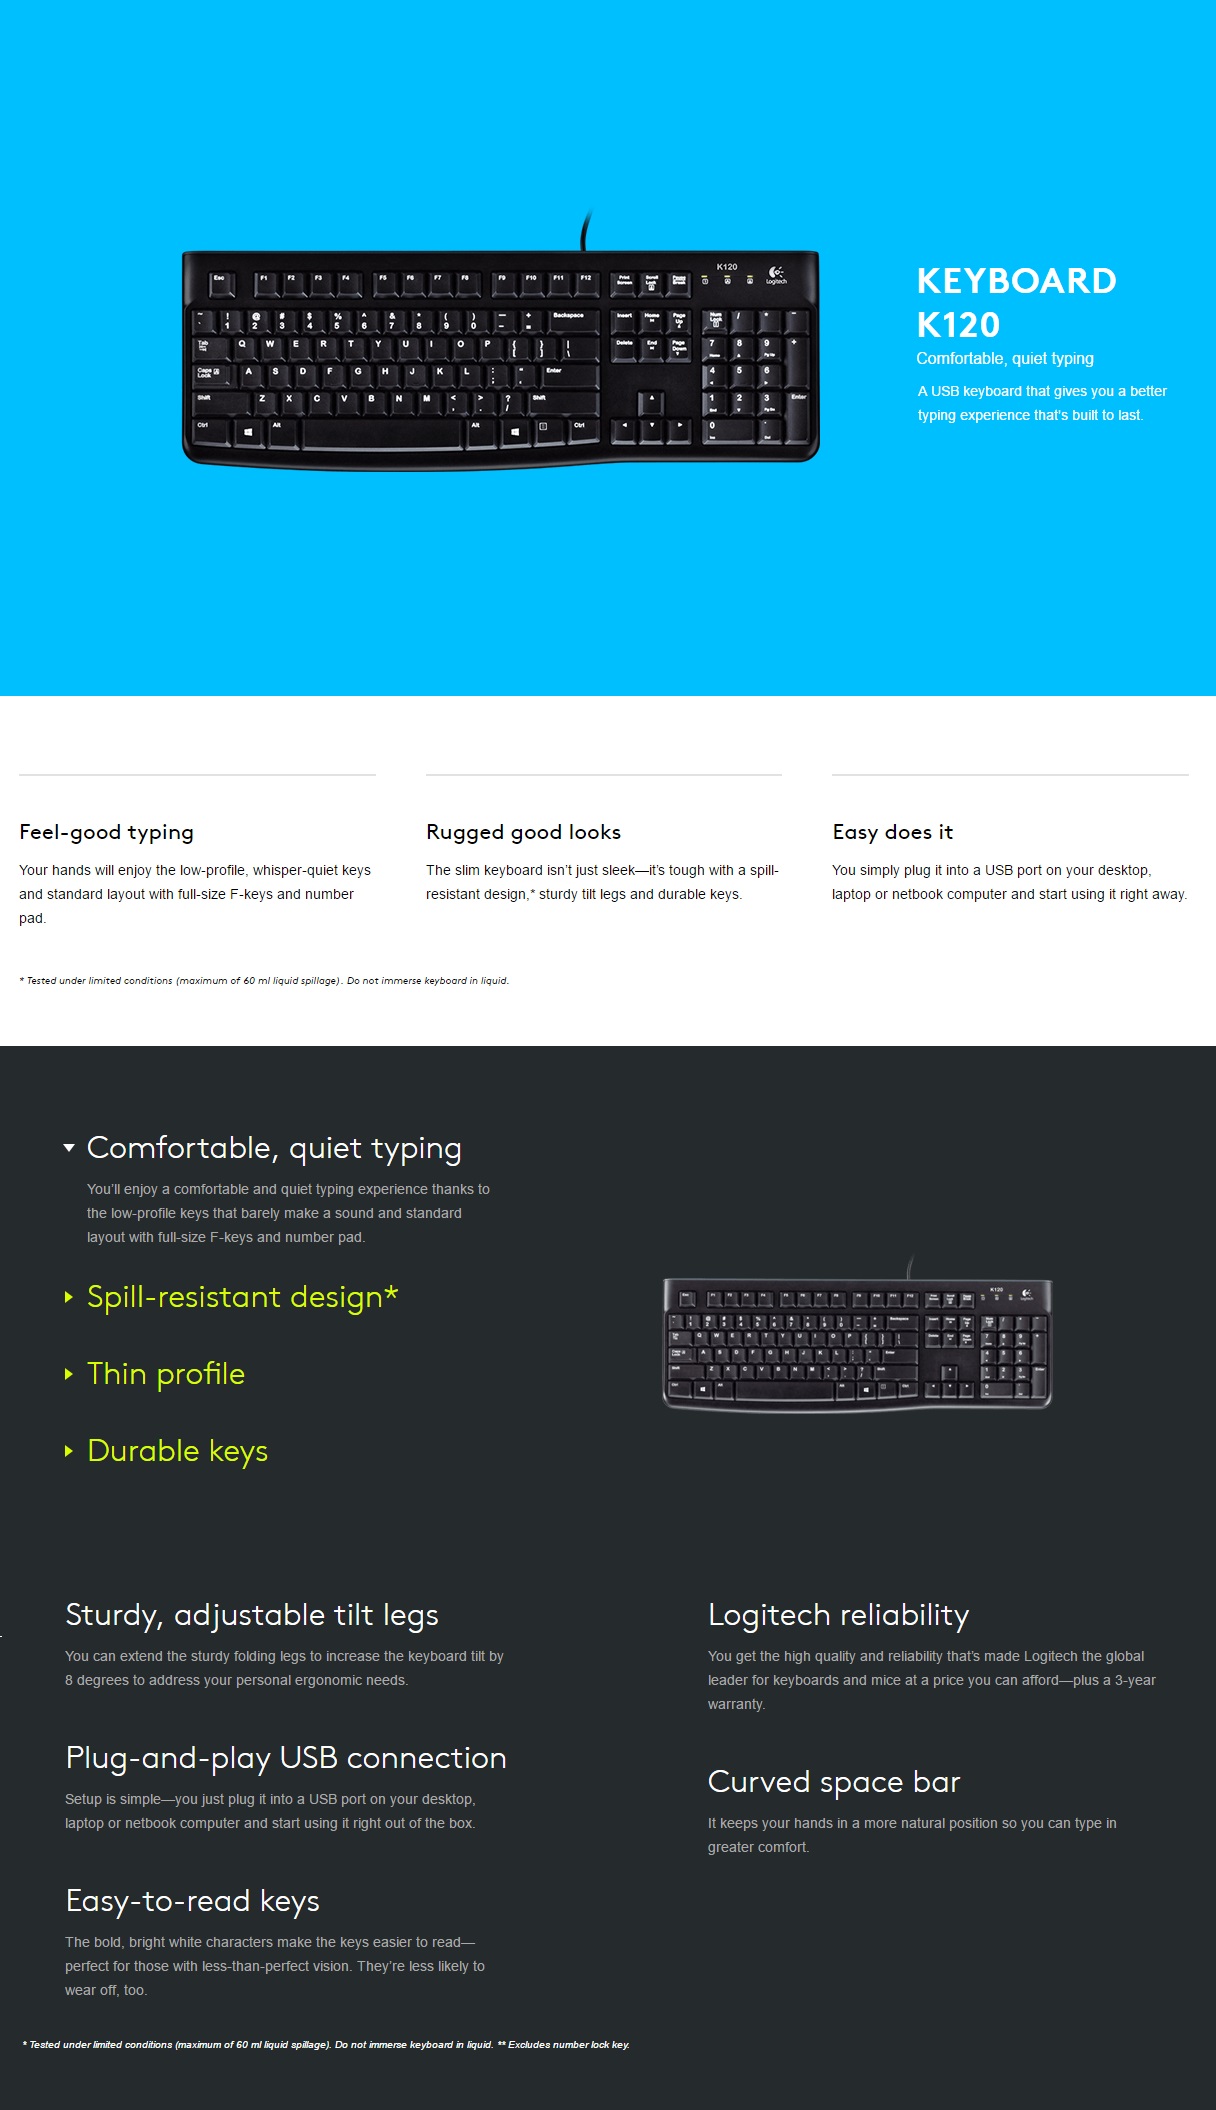 A large marketing image providing additional information about the product Logitech K120 Wired Keyboard - Additional alt info not provided